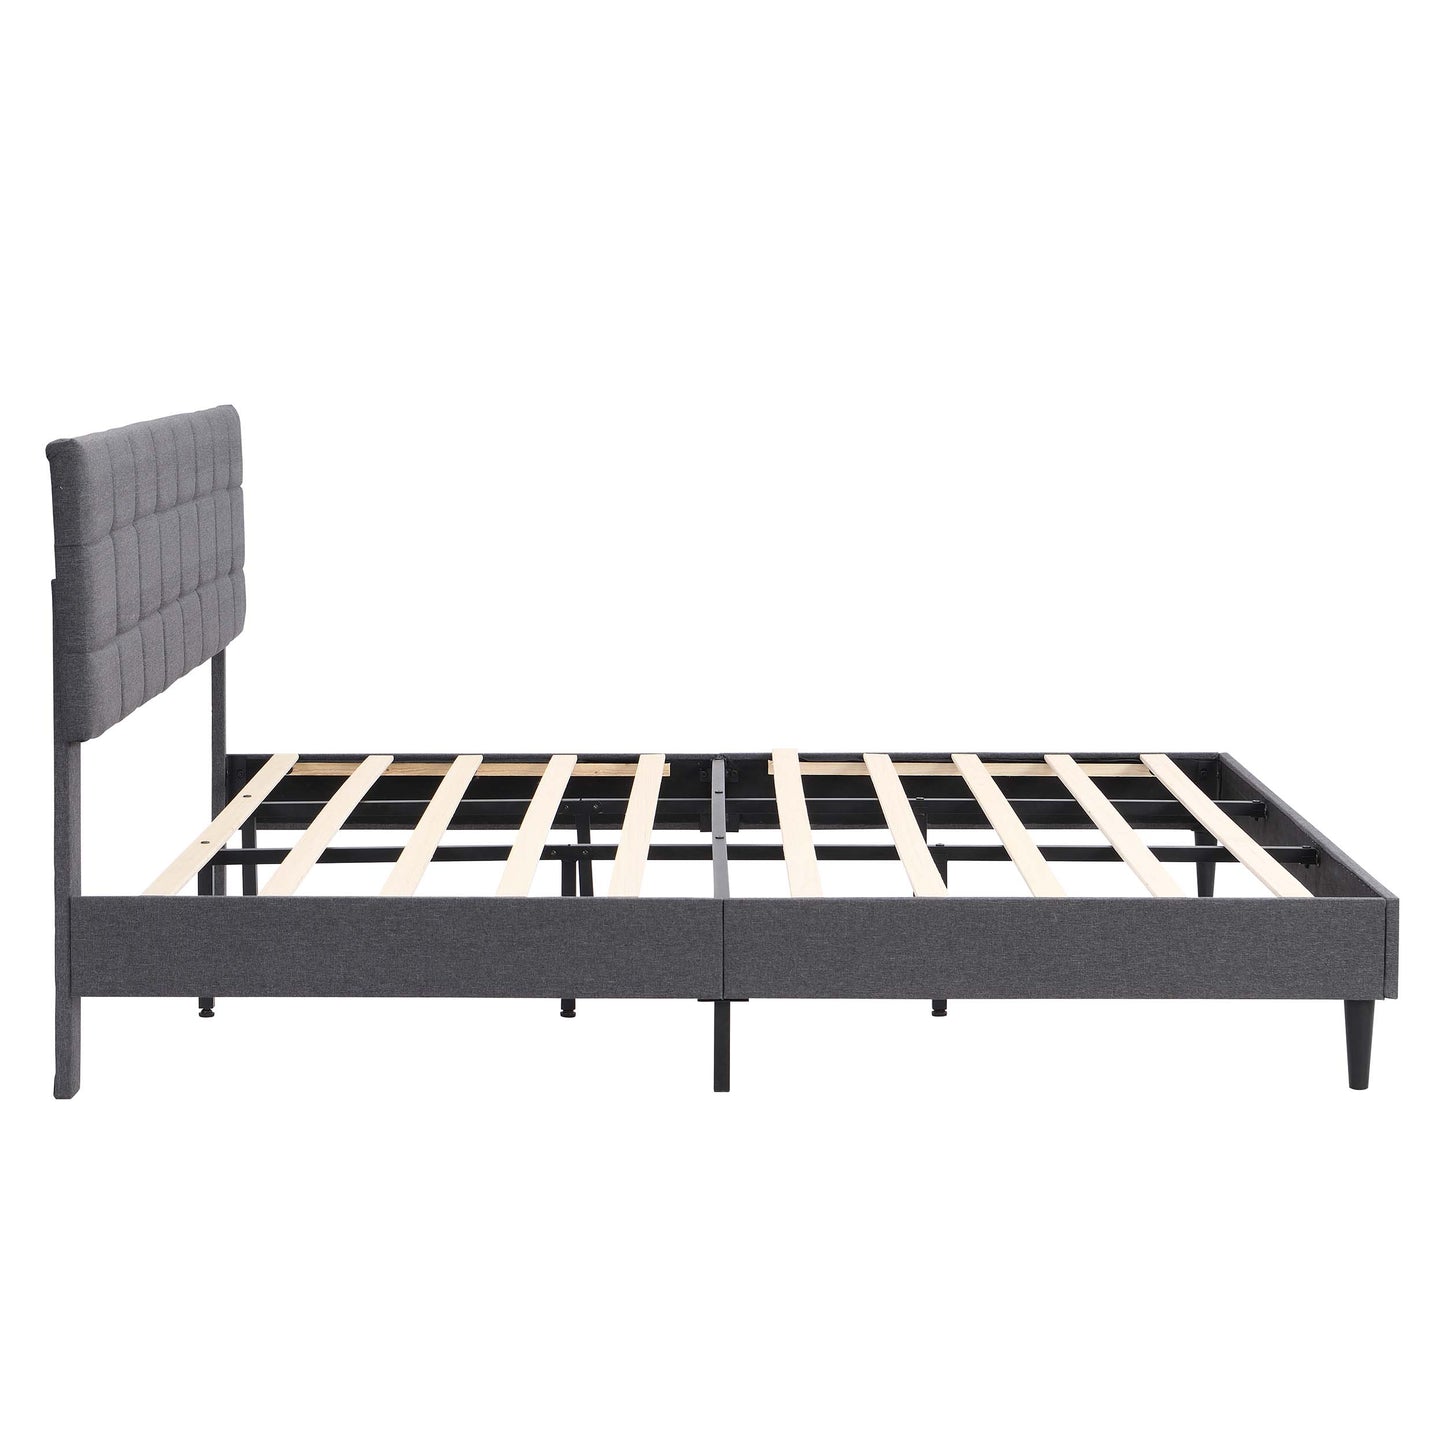 SYNGAR King Size Bed Frame, Modern Upholstered Tufted Platform Bed Frame with Headboard and Strong Support Legs for Bedroom, No Box Spring Needed, Easy Assembly, Dark Gray